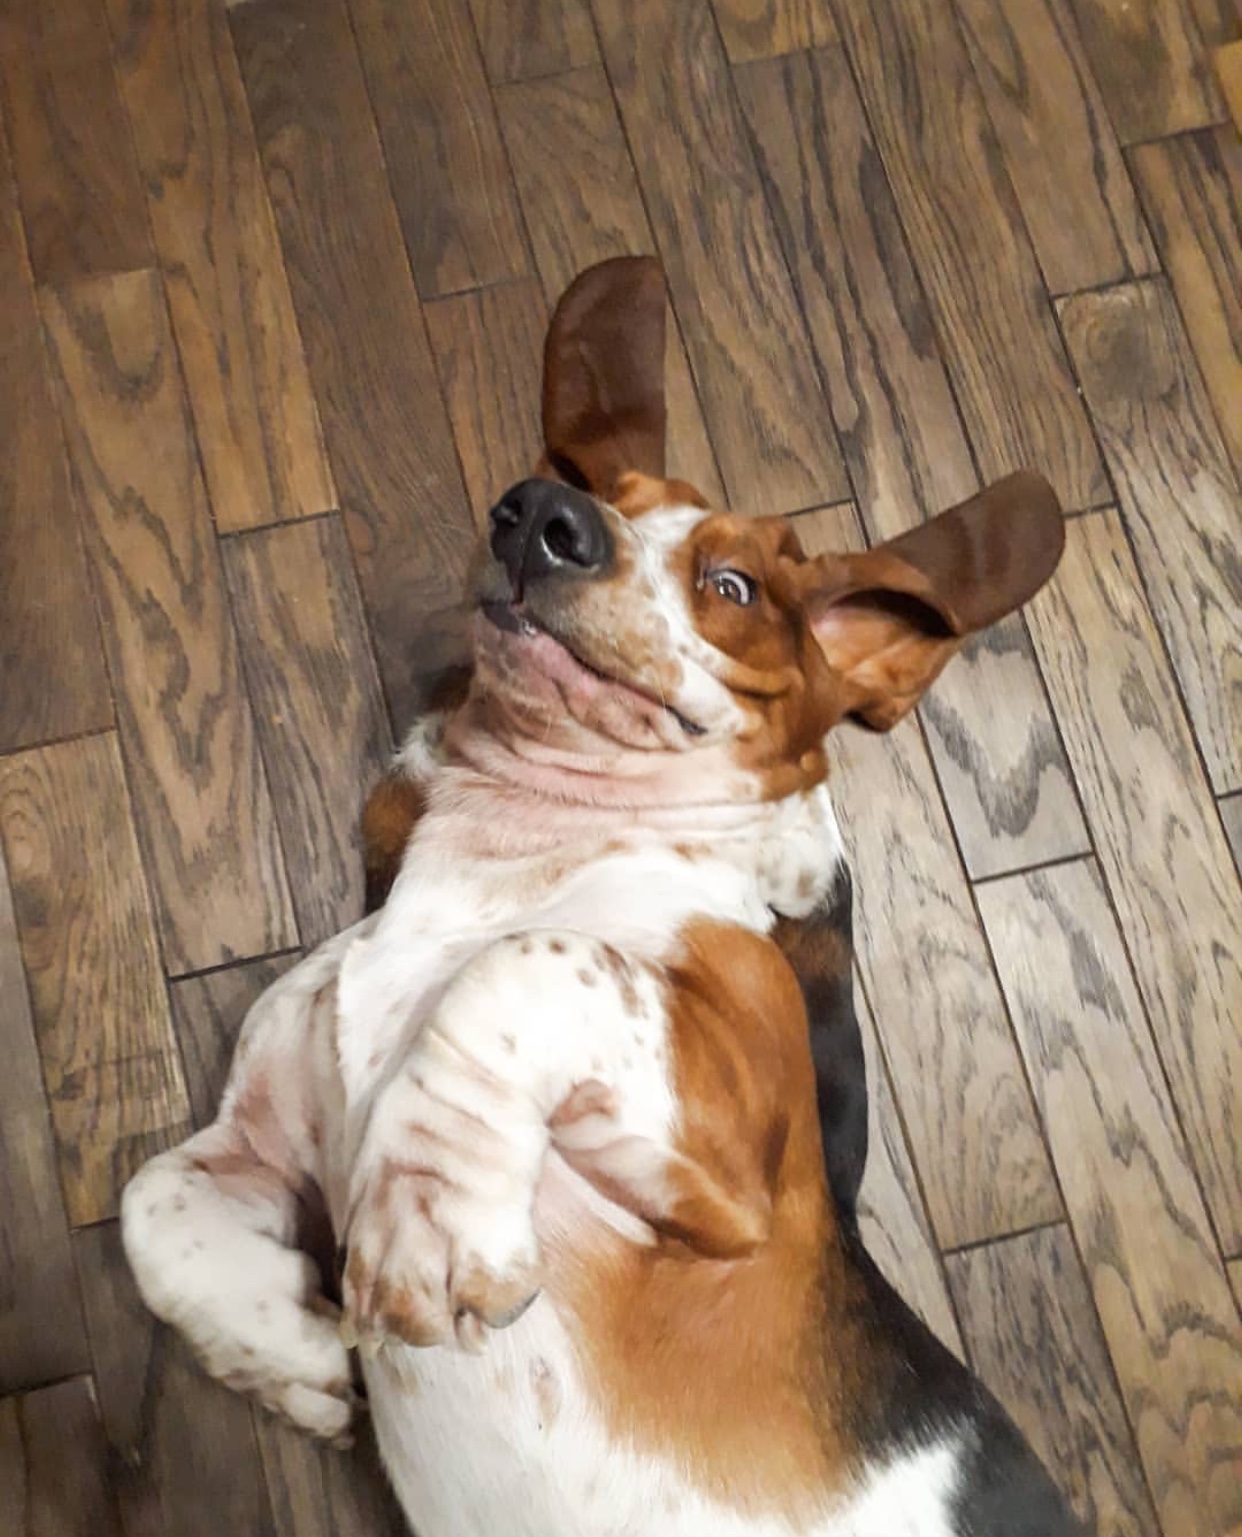 A Basset Hound lying on its back on the floor with its scared face